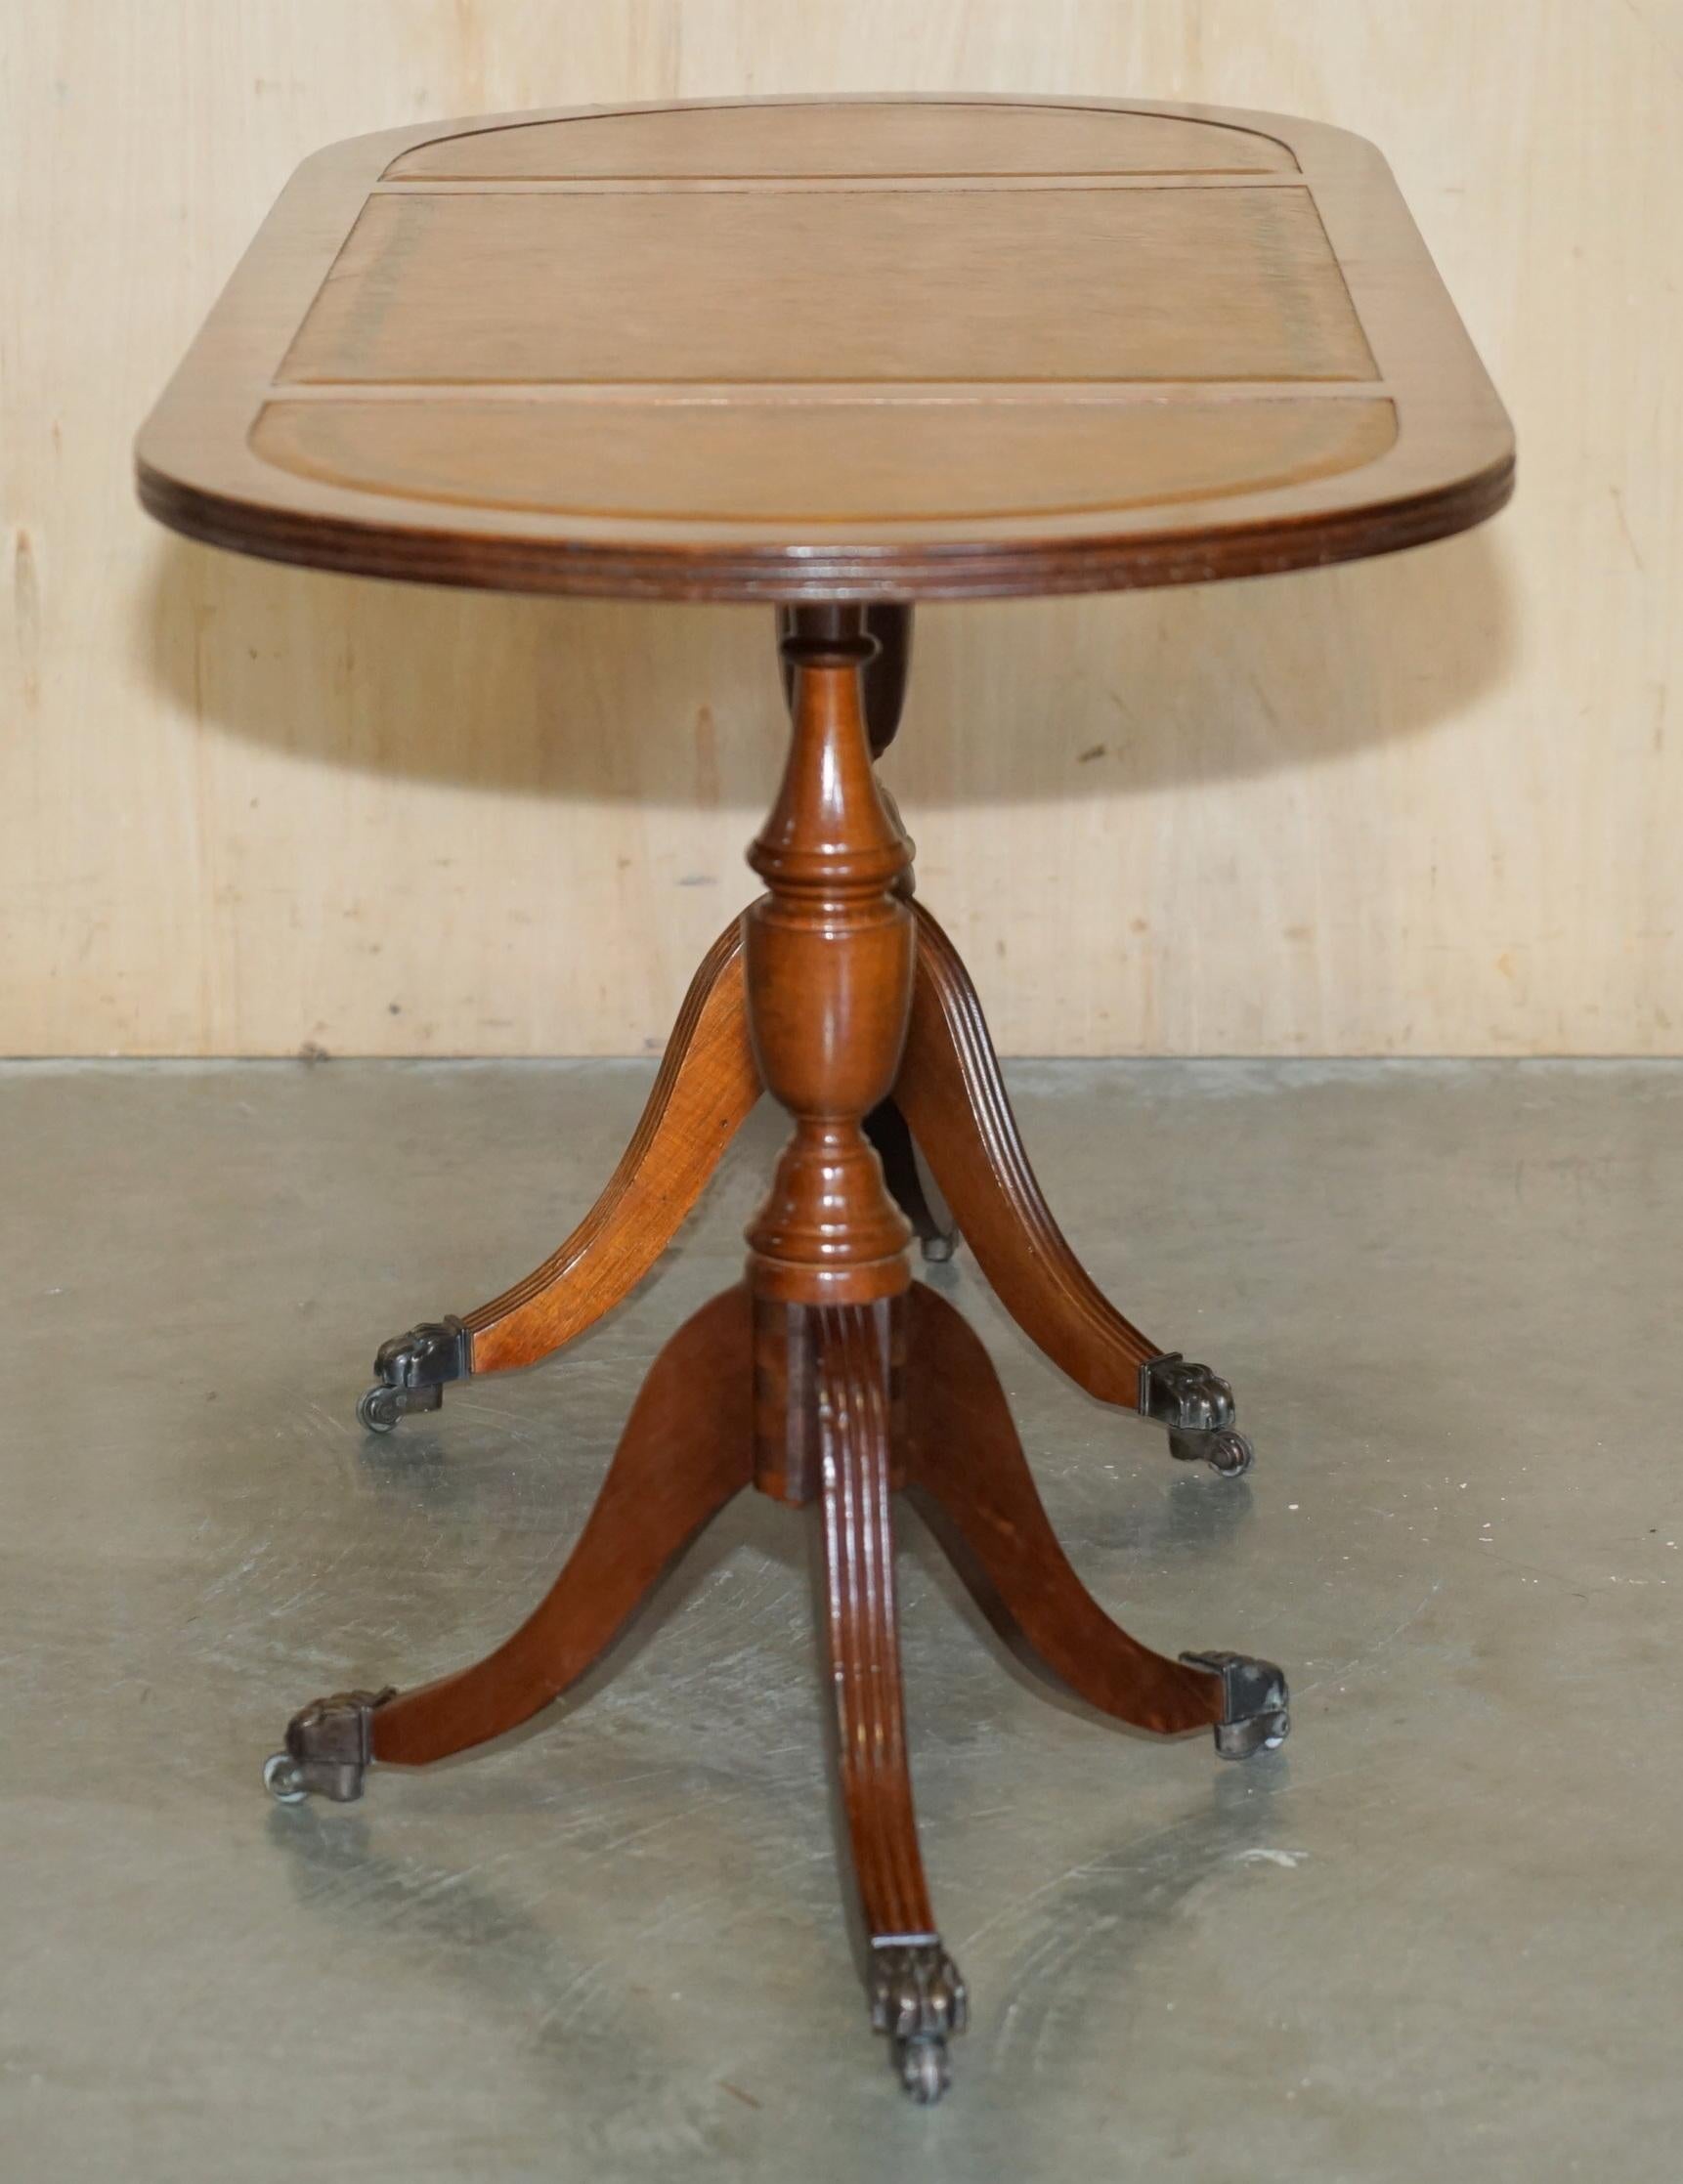 ViNTAGE HANDDYED AND AGED BROWN LEATHER OVAL COFFEE-TABLE MIT LION CASTORS im Angebot 13